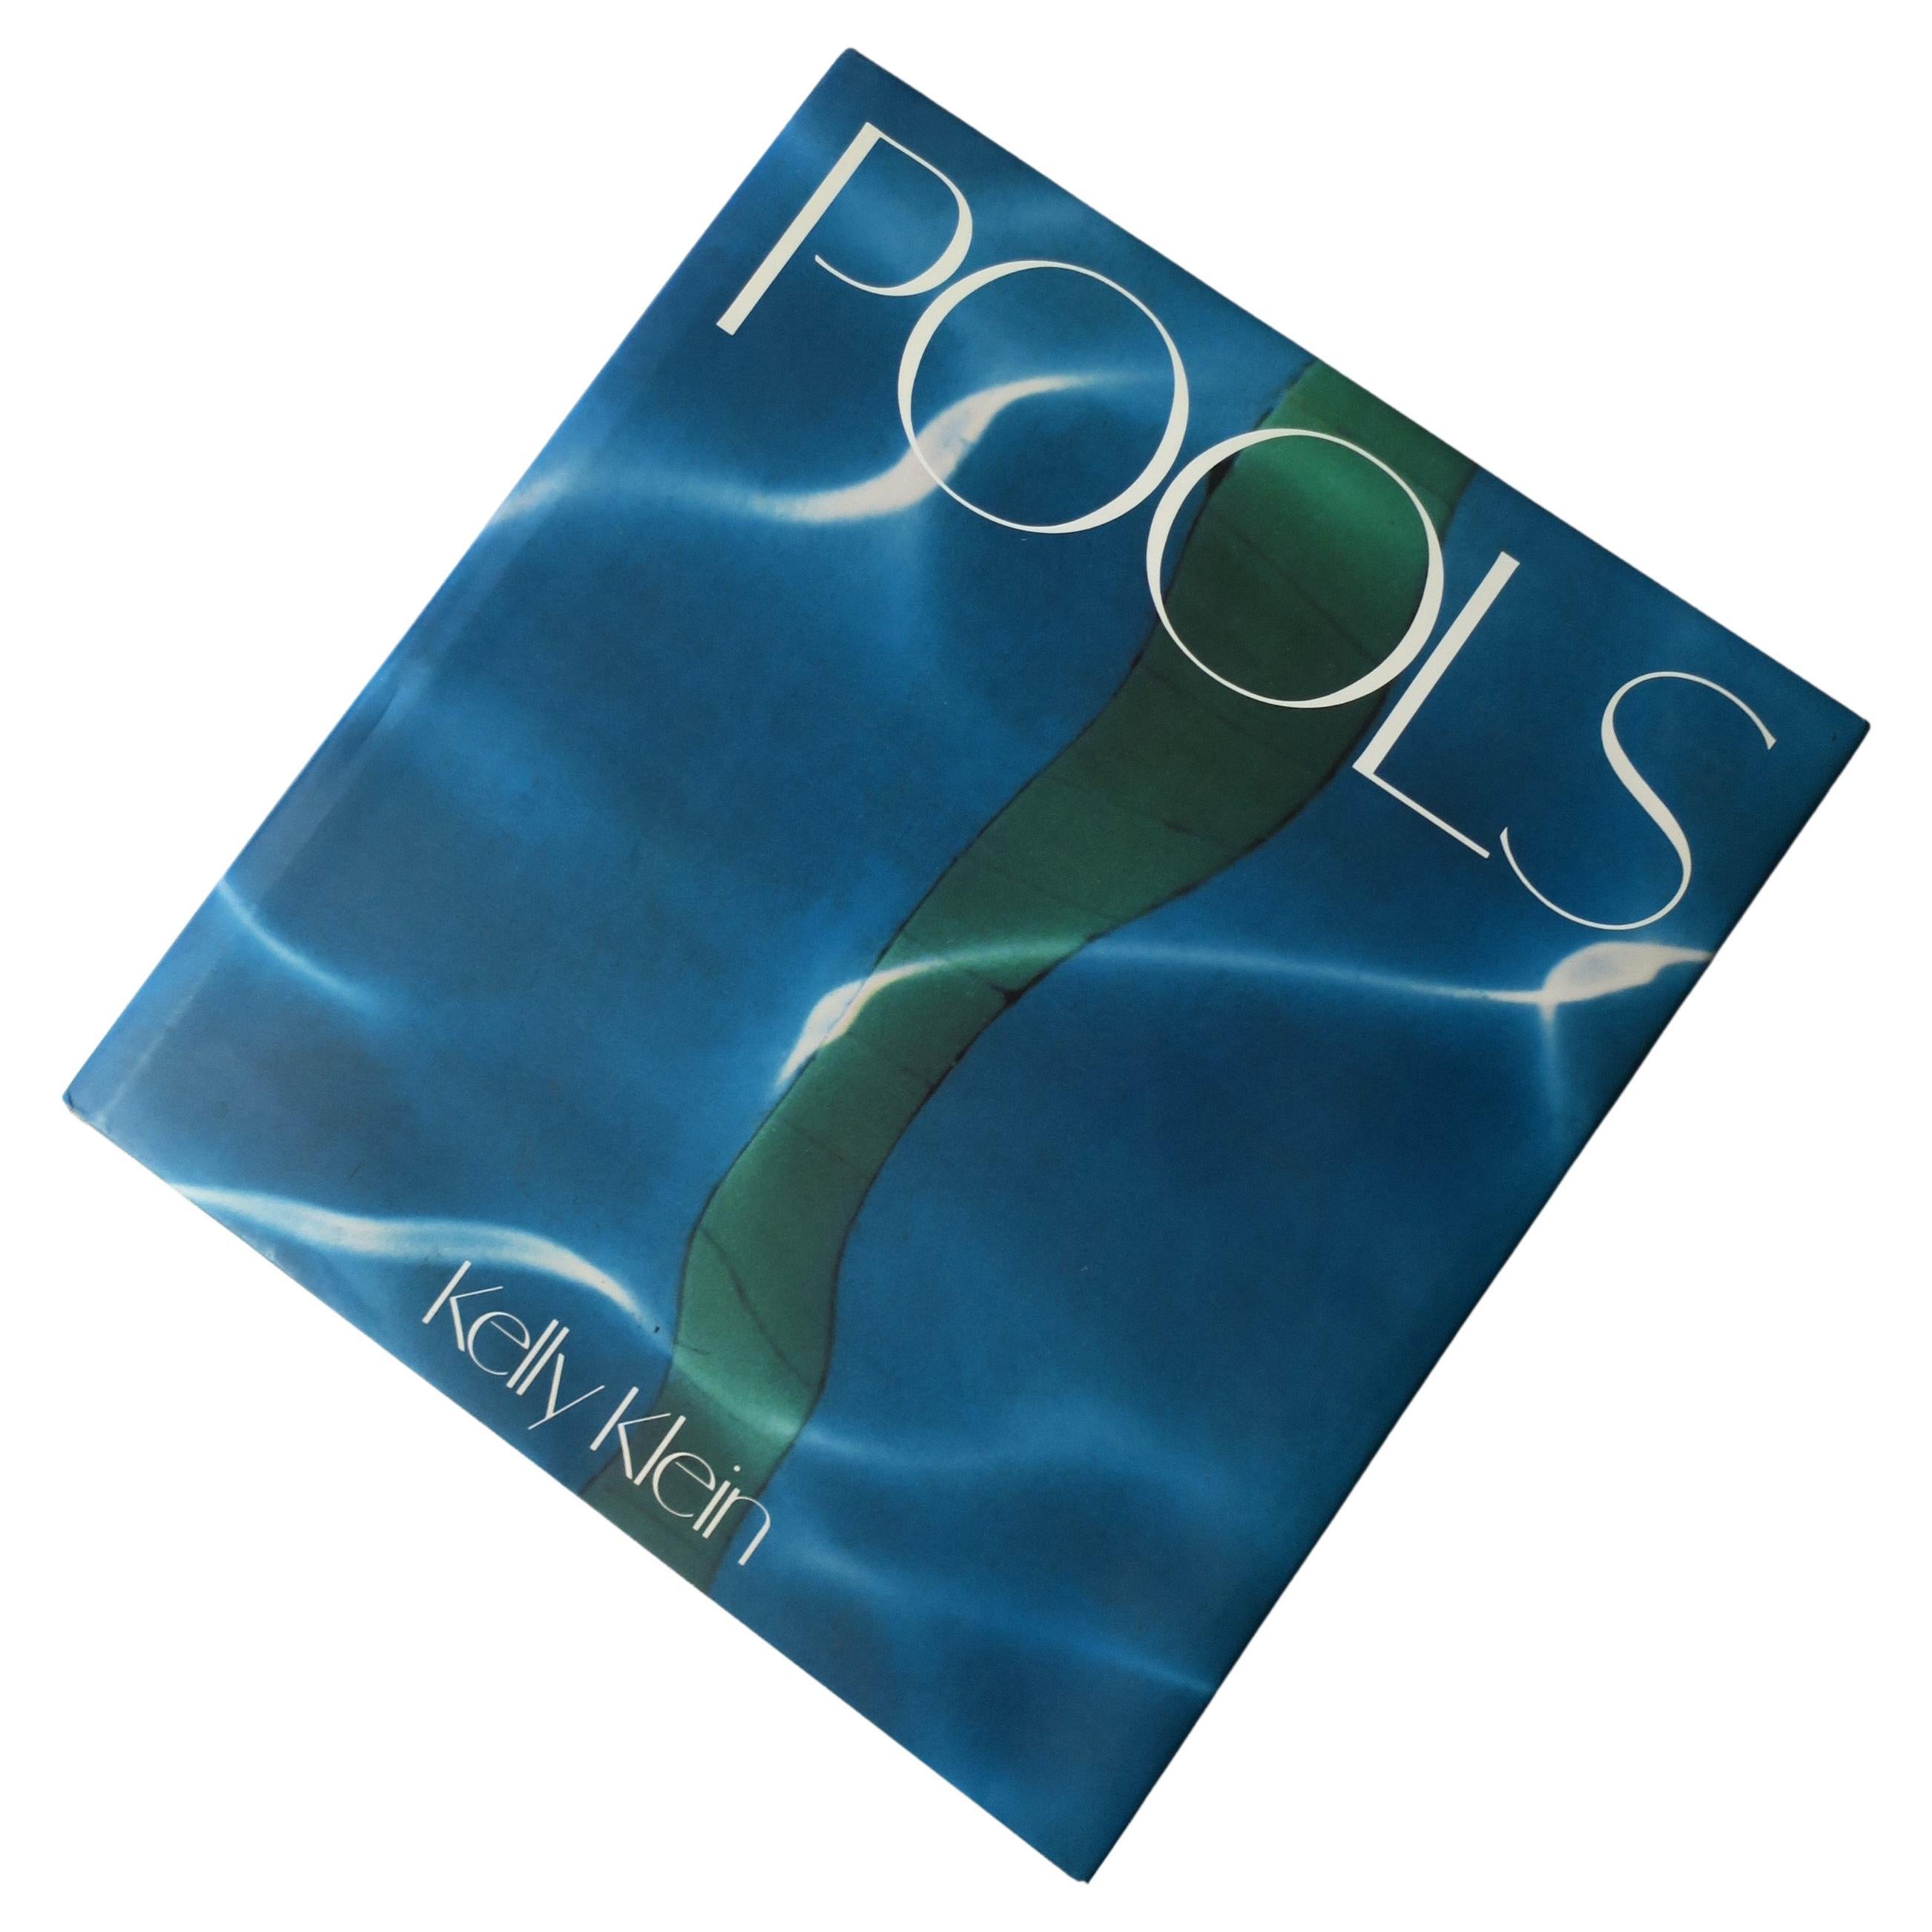 Pools by Kelly Klein an Architecture Coffee Table or Library Book, 1992 For Sale